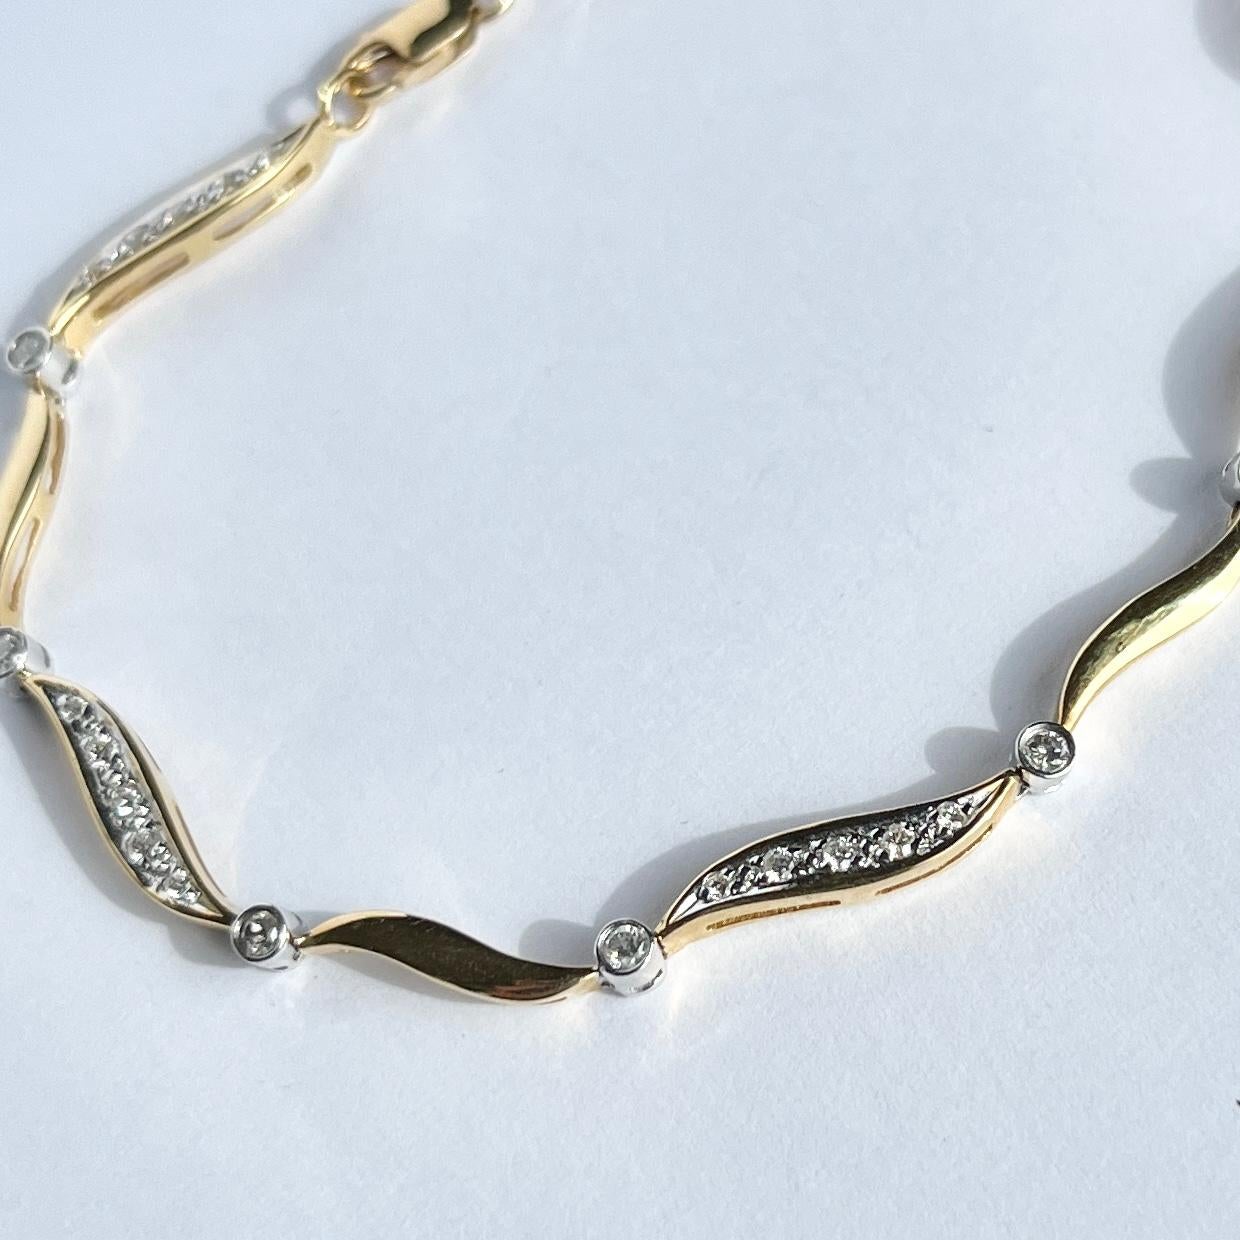 Vintage Diamond, 18 Carat Gold and Platinum Bracelet In Good Condition For Sale In Chipping Campden, GB